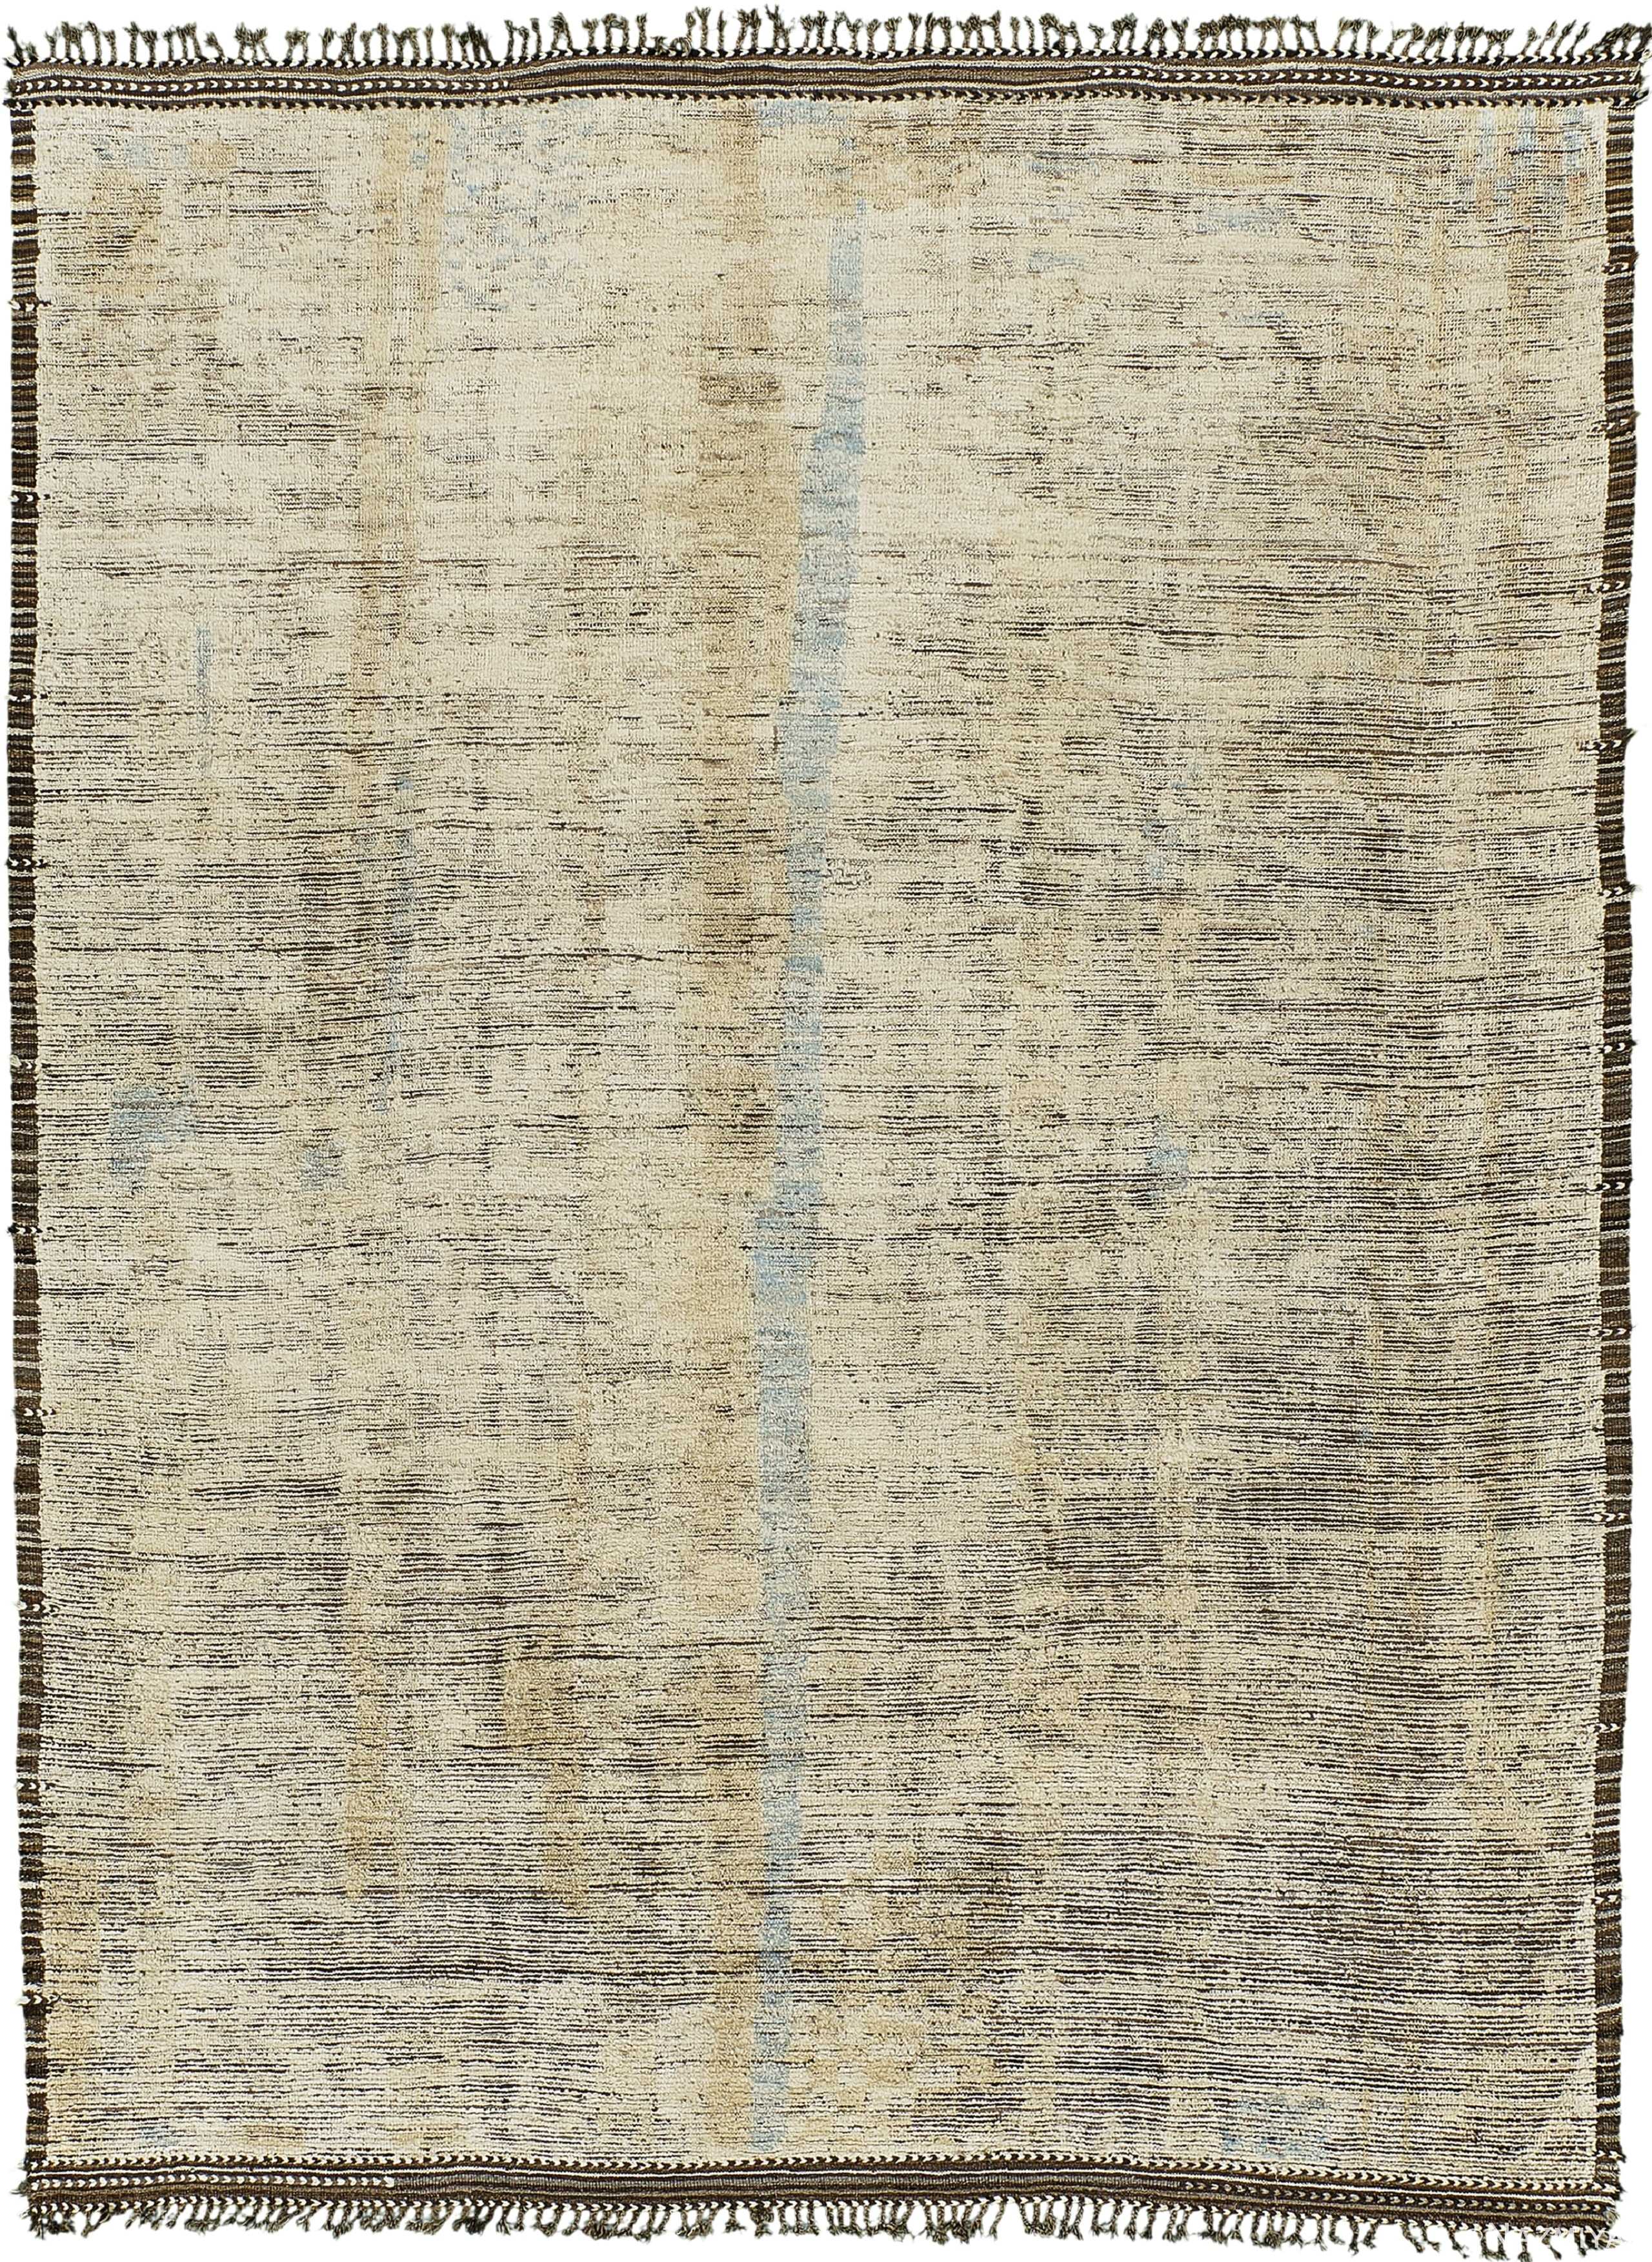 Earth Tones Decorative Modern Distressed Rug 60709 by Nazmiyal Antique Rugs